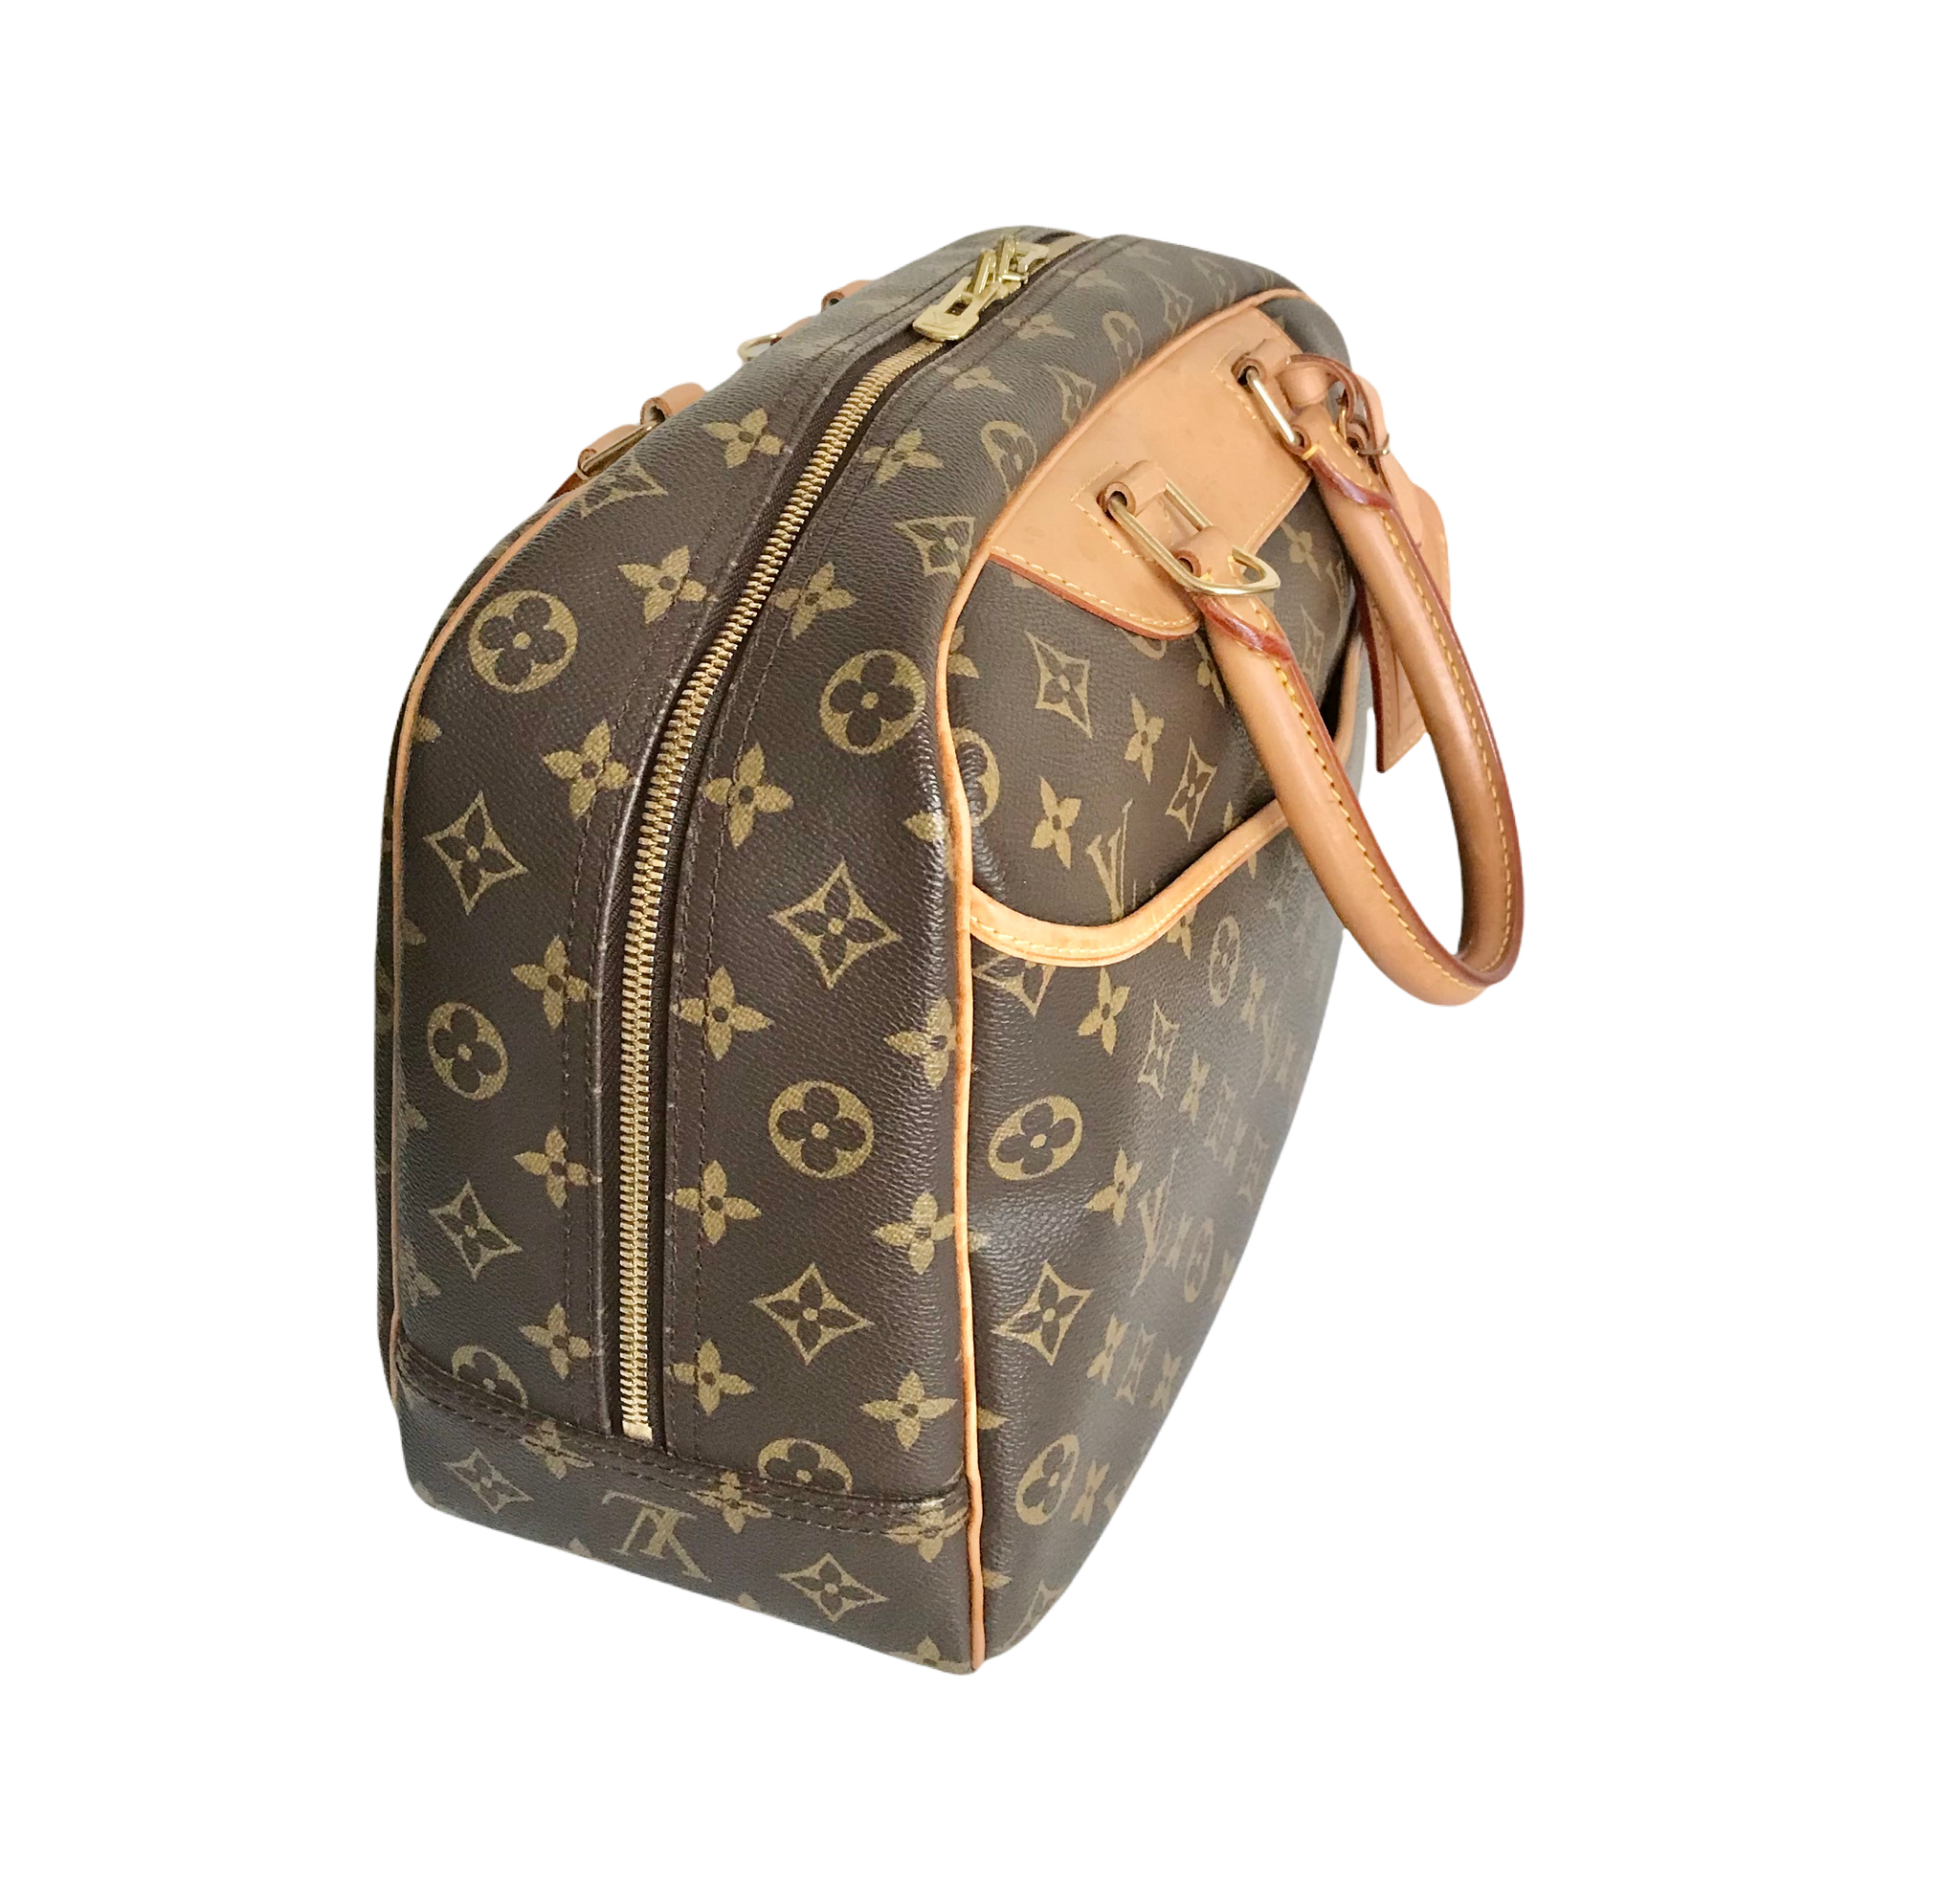 SOLD) genuine pre-owned Louis Vuitton deauville bag – Deluxe Life Collection